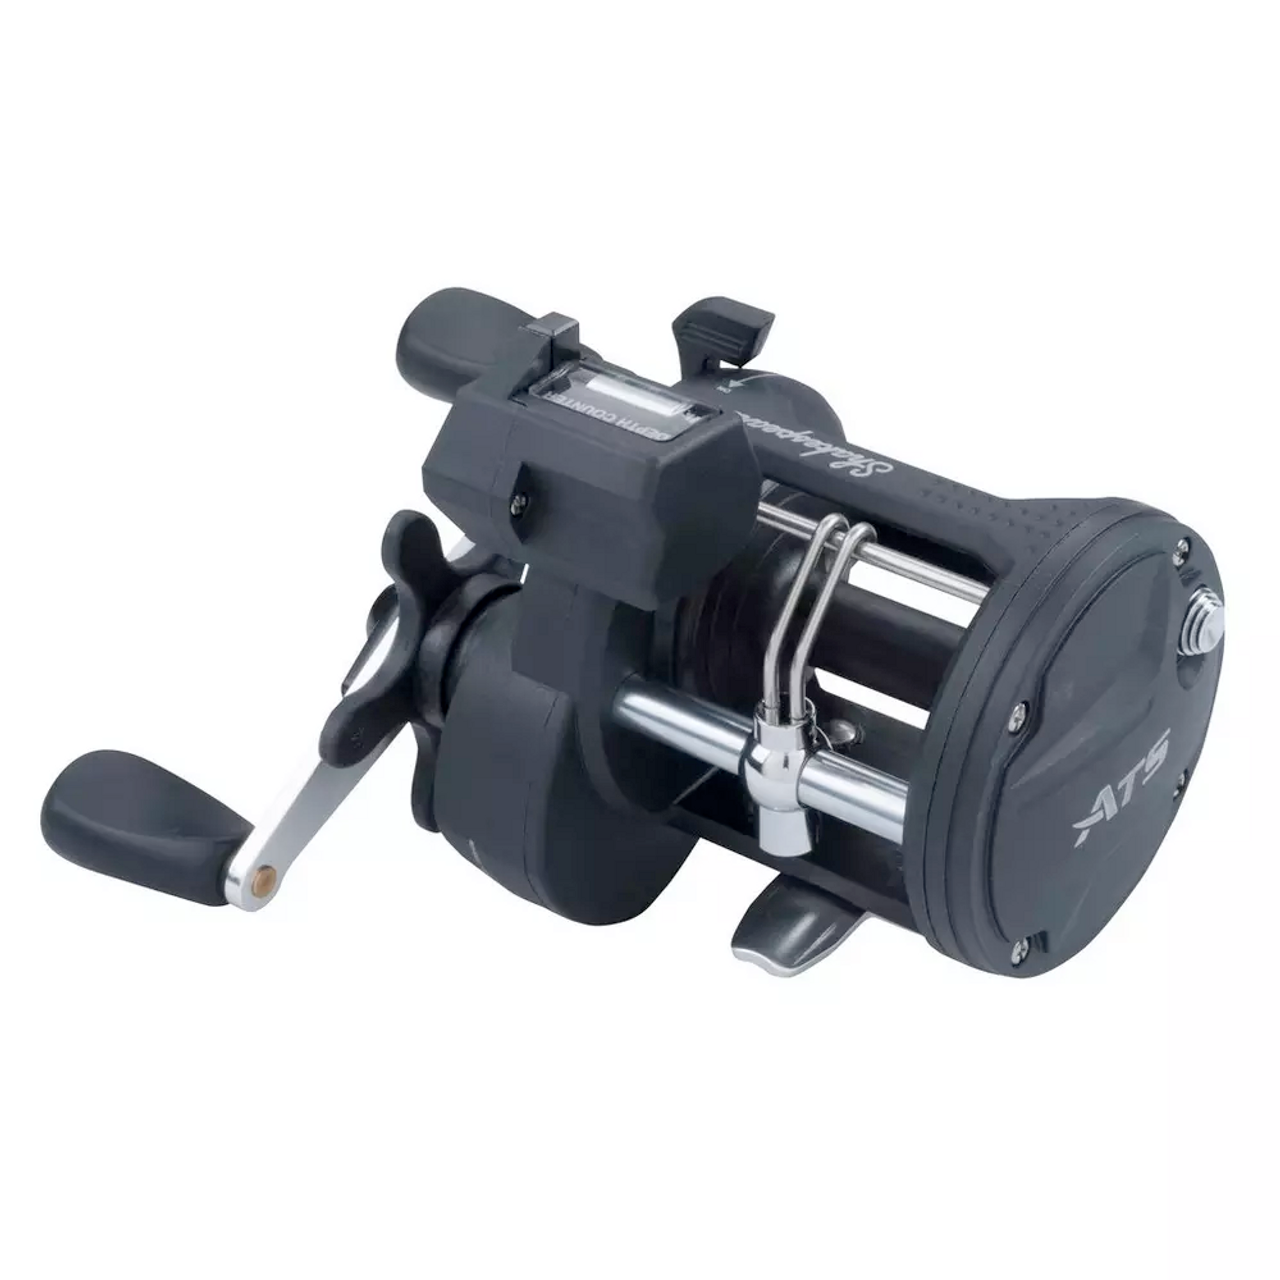 Shakespeare ATS Conventional Line Counter Reel, RH, 2BB, 5.1:1 Ratio, Reel Size: 20, Graphite Spool, Braid 30/280, 40/230, 50/195